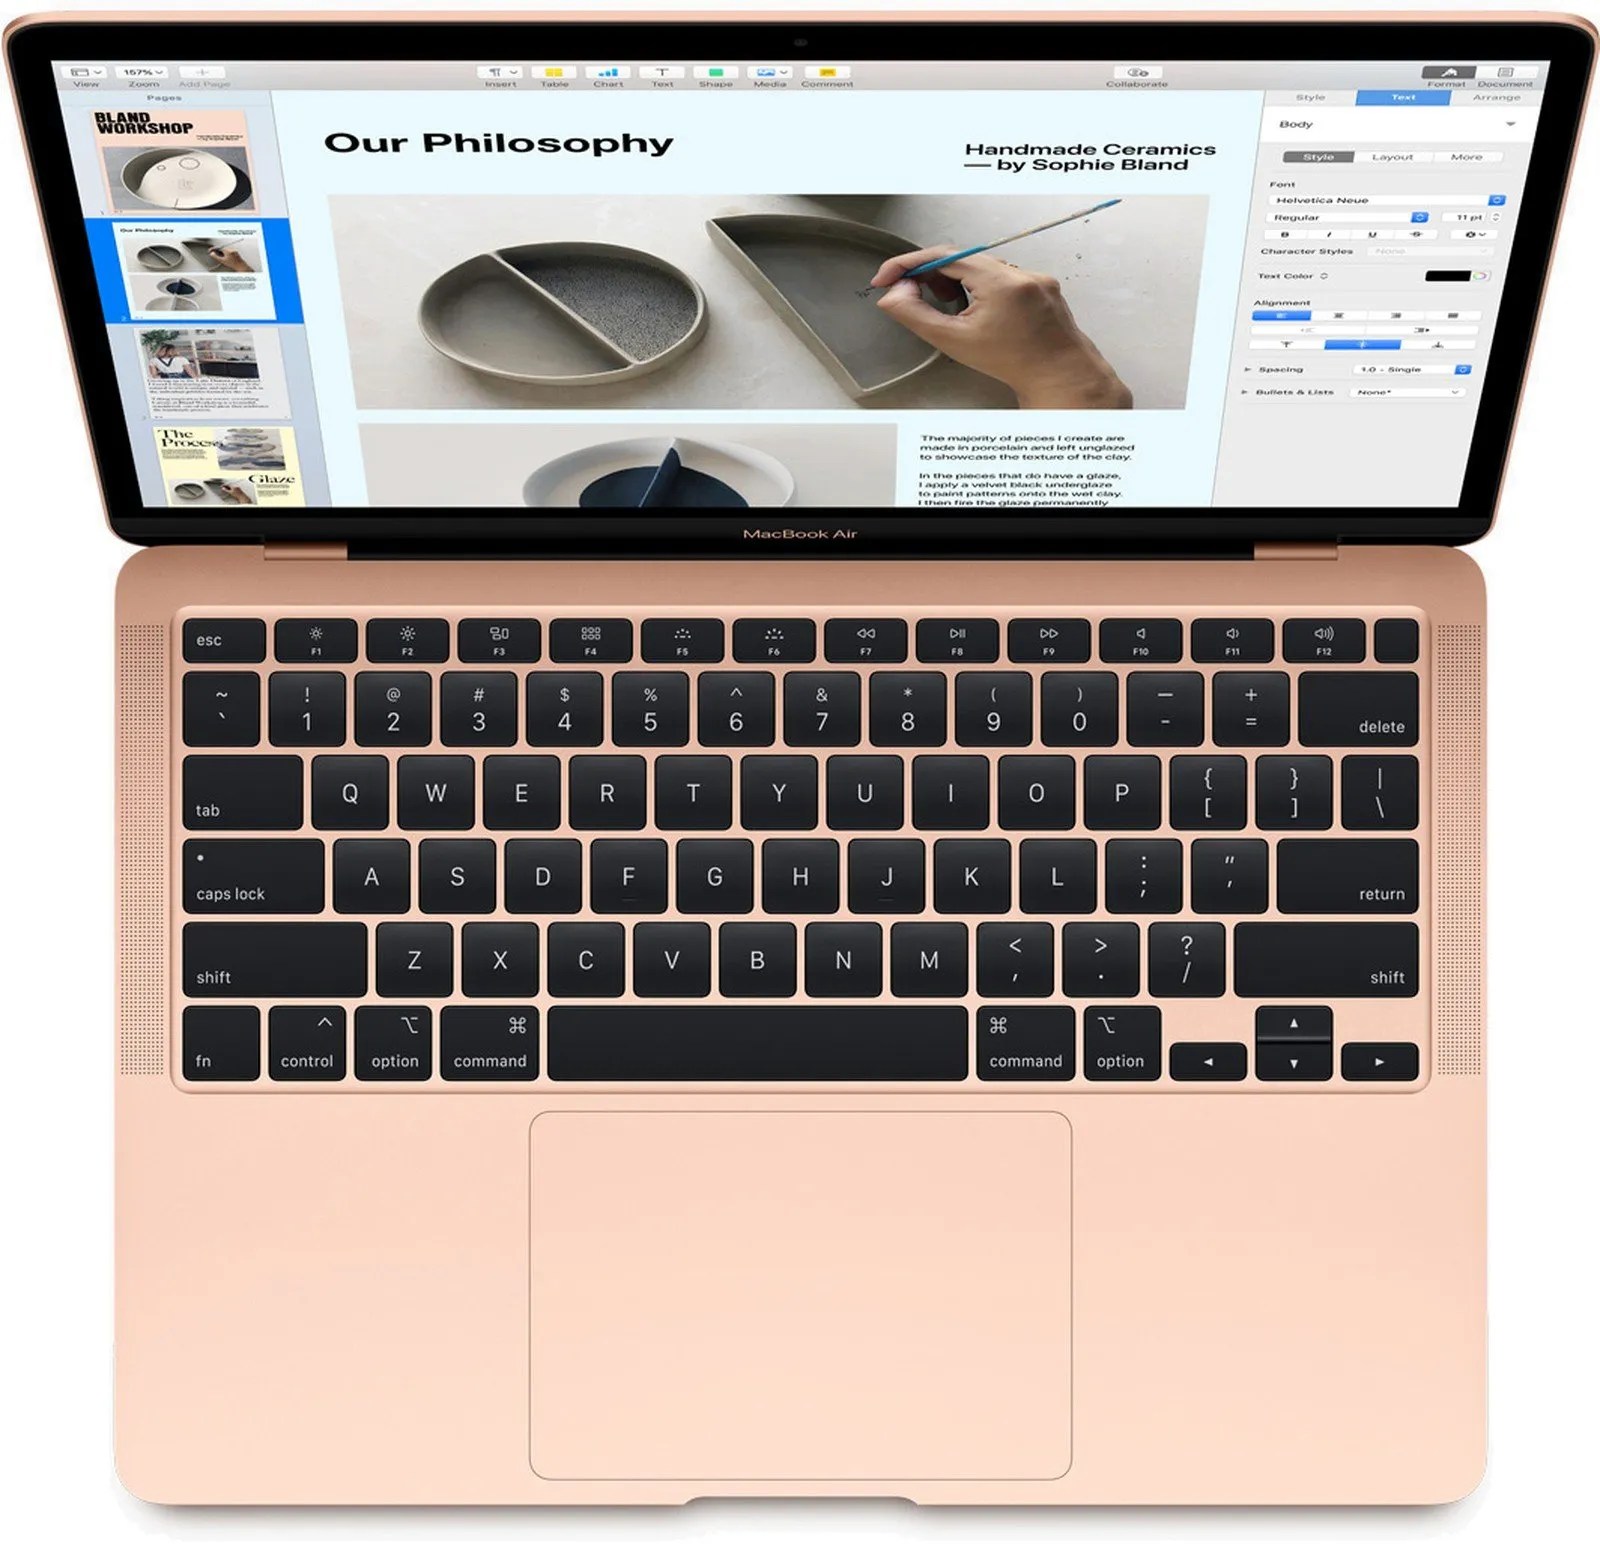 Is your MacBook Trackpad Not Working: Here are the Fixes